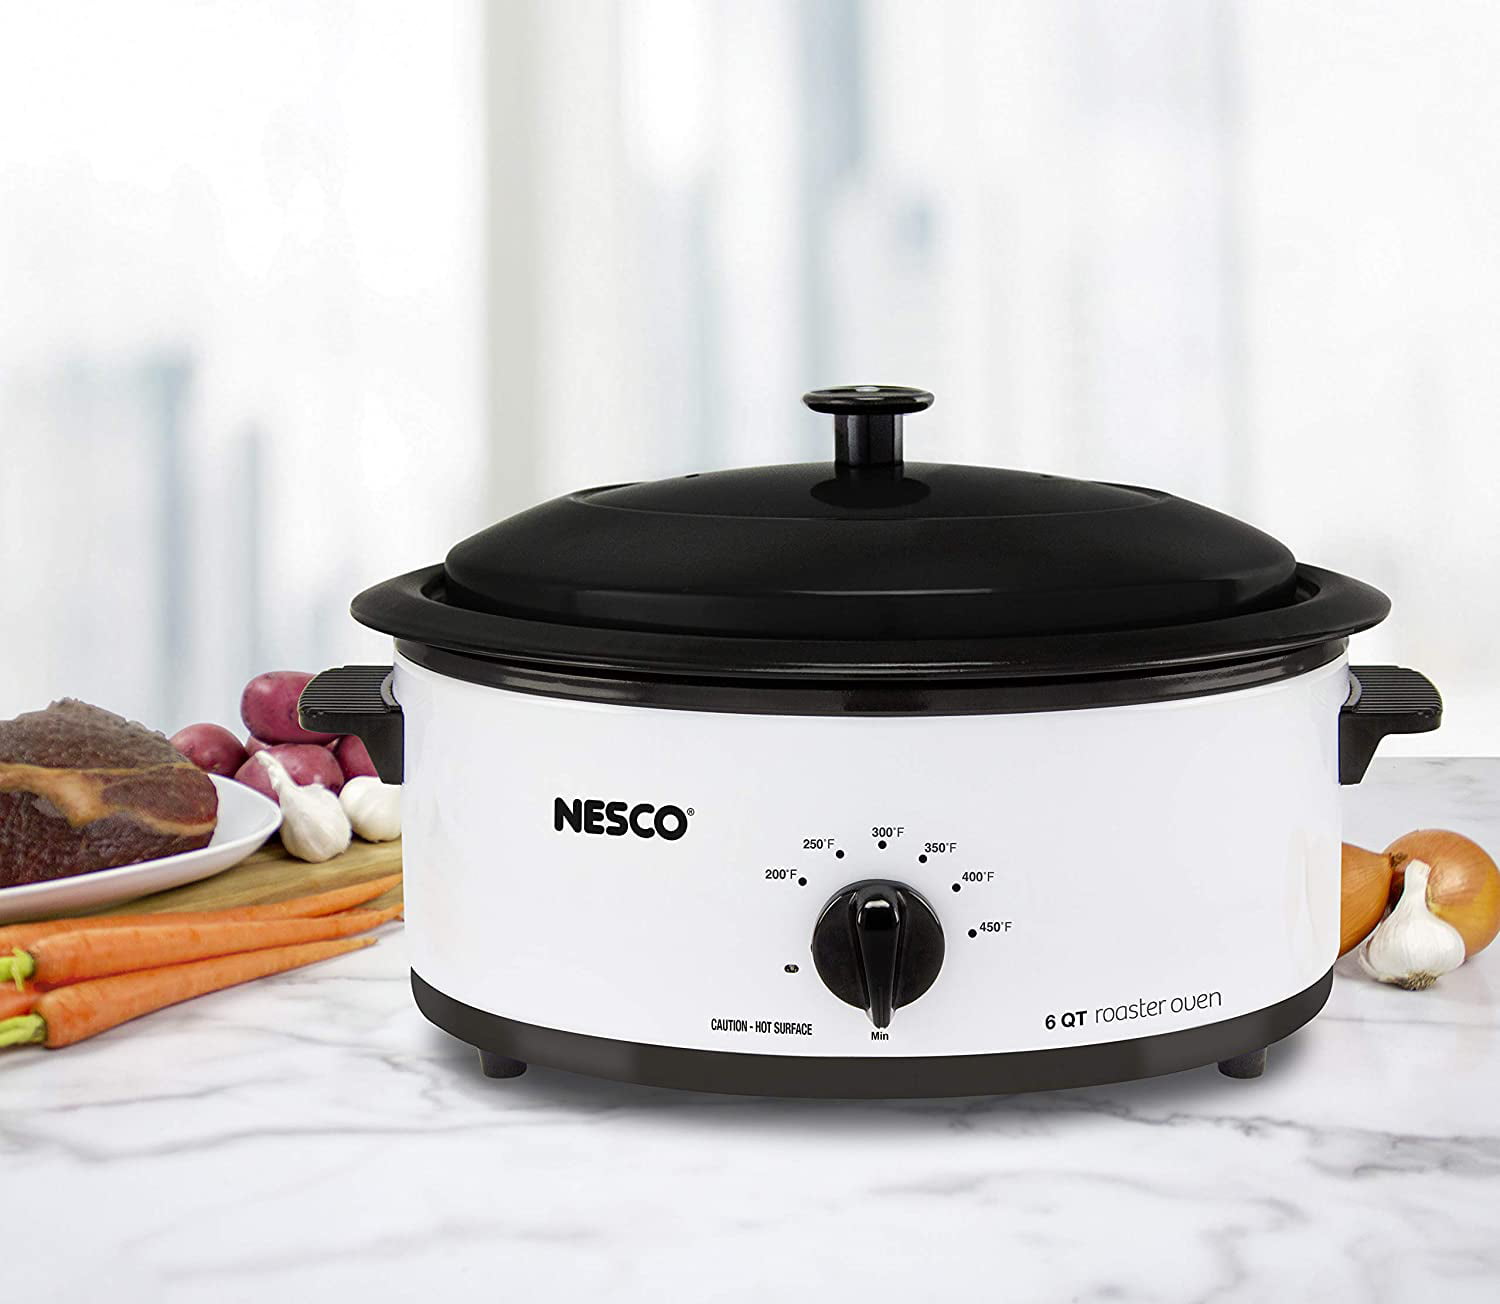 Nesco 12-Quart Stainless Steel Programmable Rectangle Porcelain Roaster  Oven with Metal Lid at